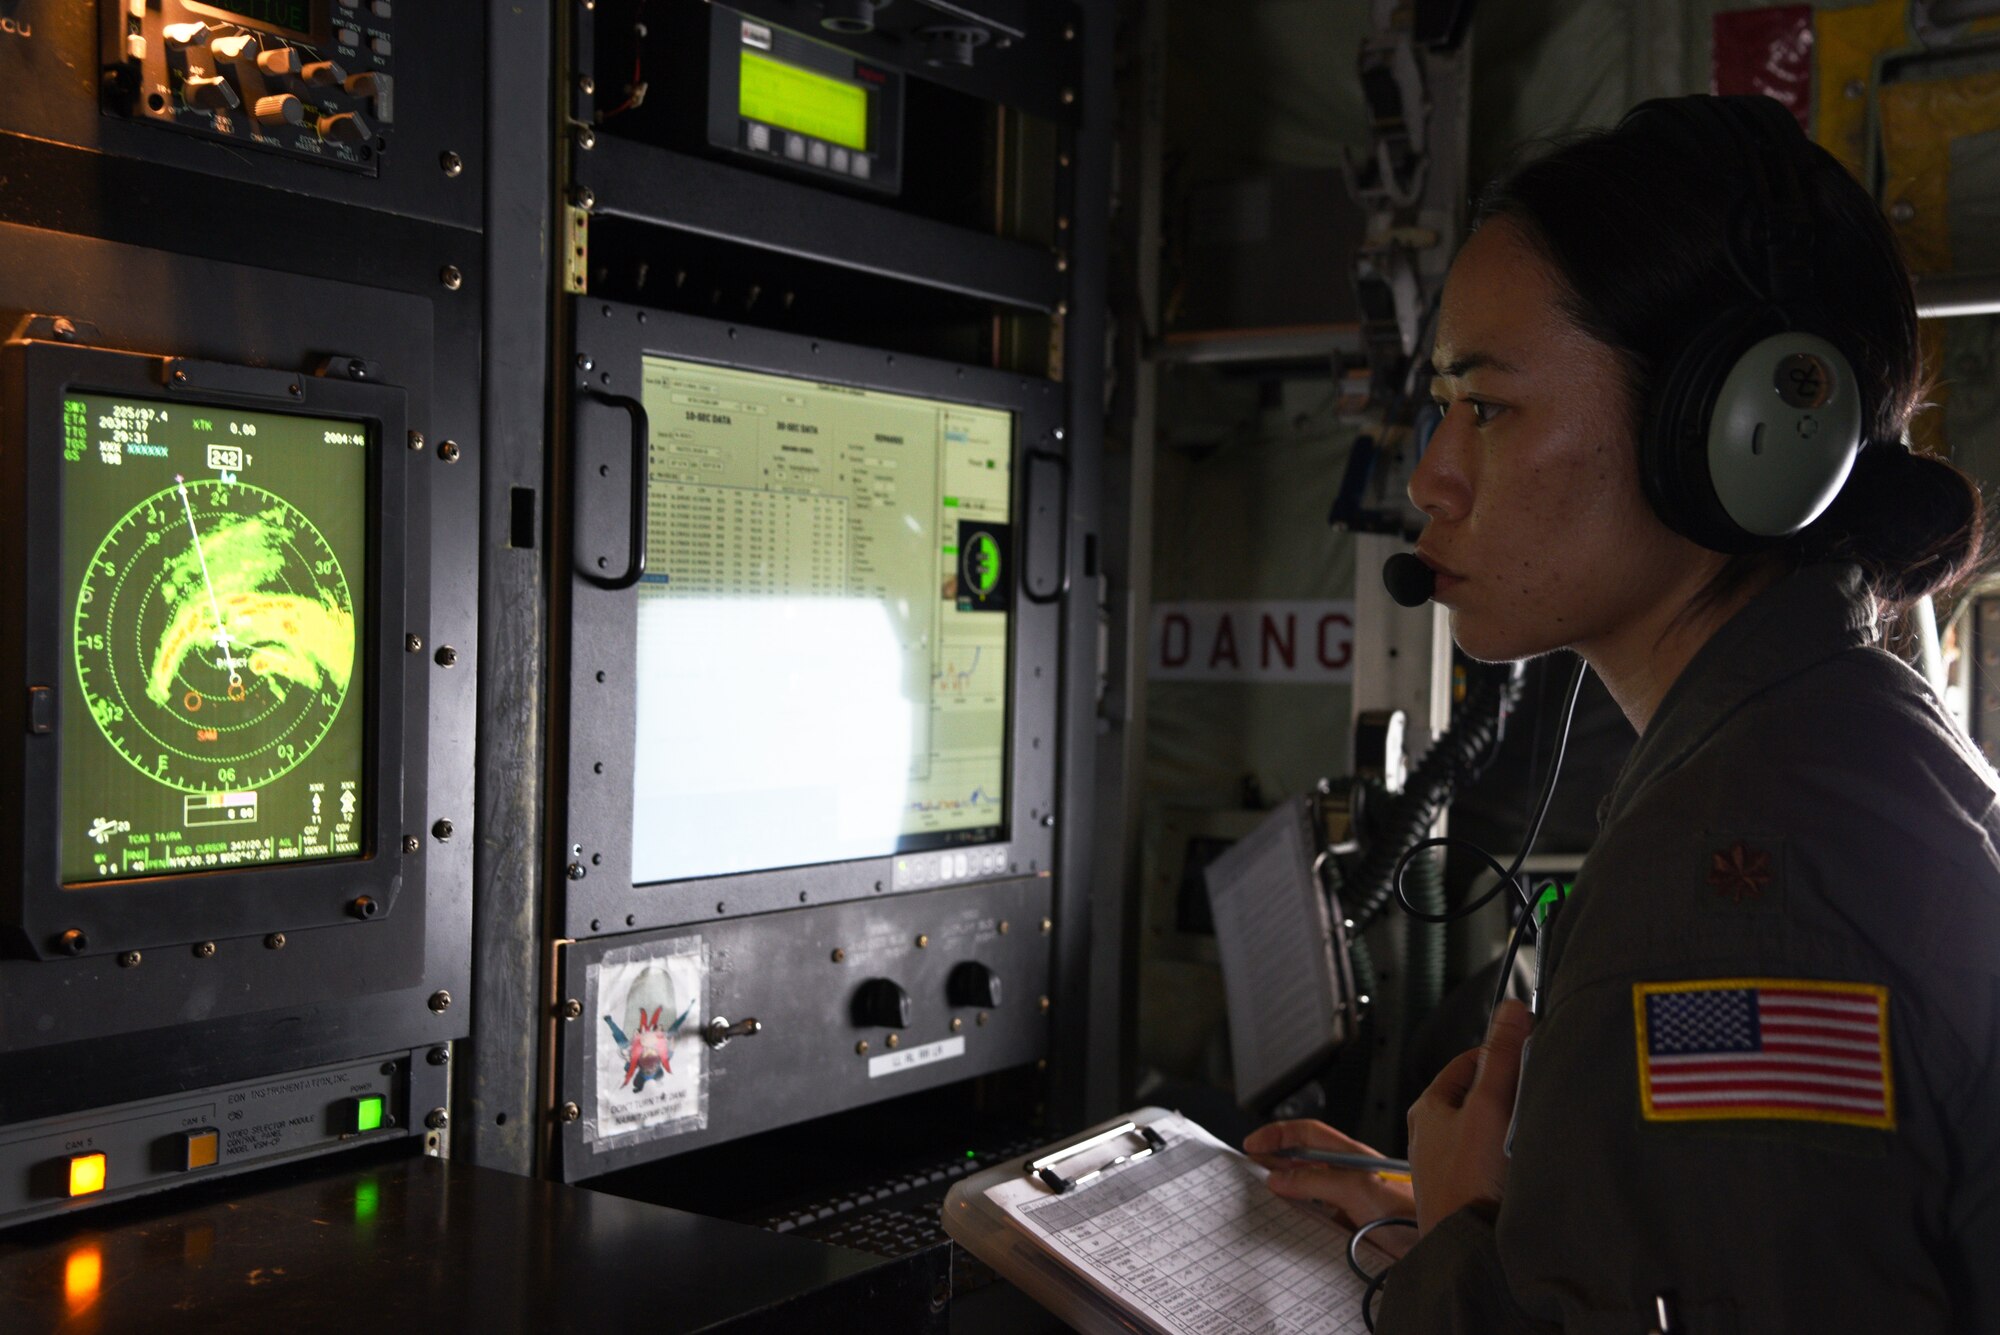 Maj. Joyce Hirai, 53rd Weather Reconnaissance Squadron aerial reconnaissance weather officer, checks the data from the dropsonde prior to sending it to the National Hurricane Center as the Hurricane Hunters, fly into Hurricane Sam, Sept. 27.  Hurricane Sam had downgraded to a category 3 hurricane when the AF Reserve Hurricane Hunters entered, but was intensifying before they headed back. The Hurricane Hunters gather data weather data from dropsondes and aircraft sensors, which is given to the NHC to assist them with their forecasts and storm warnings. (U.S. Air Force photo by Jessica L. Kendziorek)